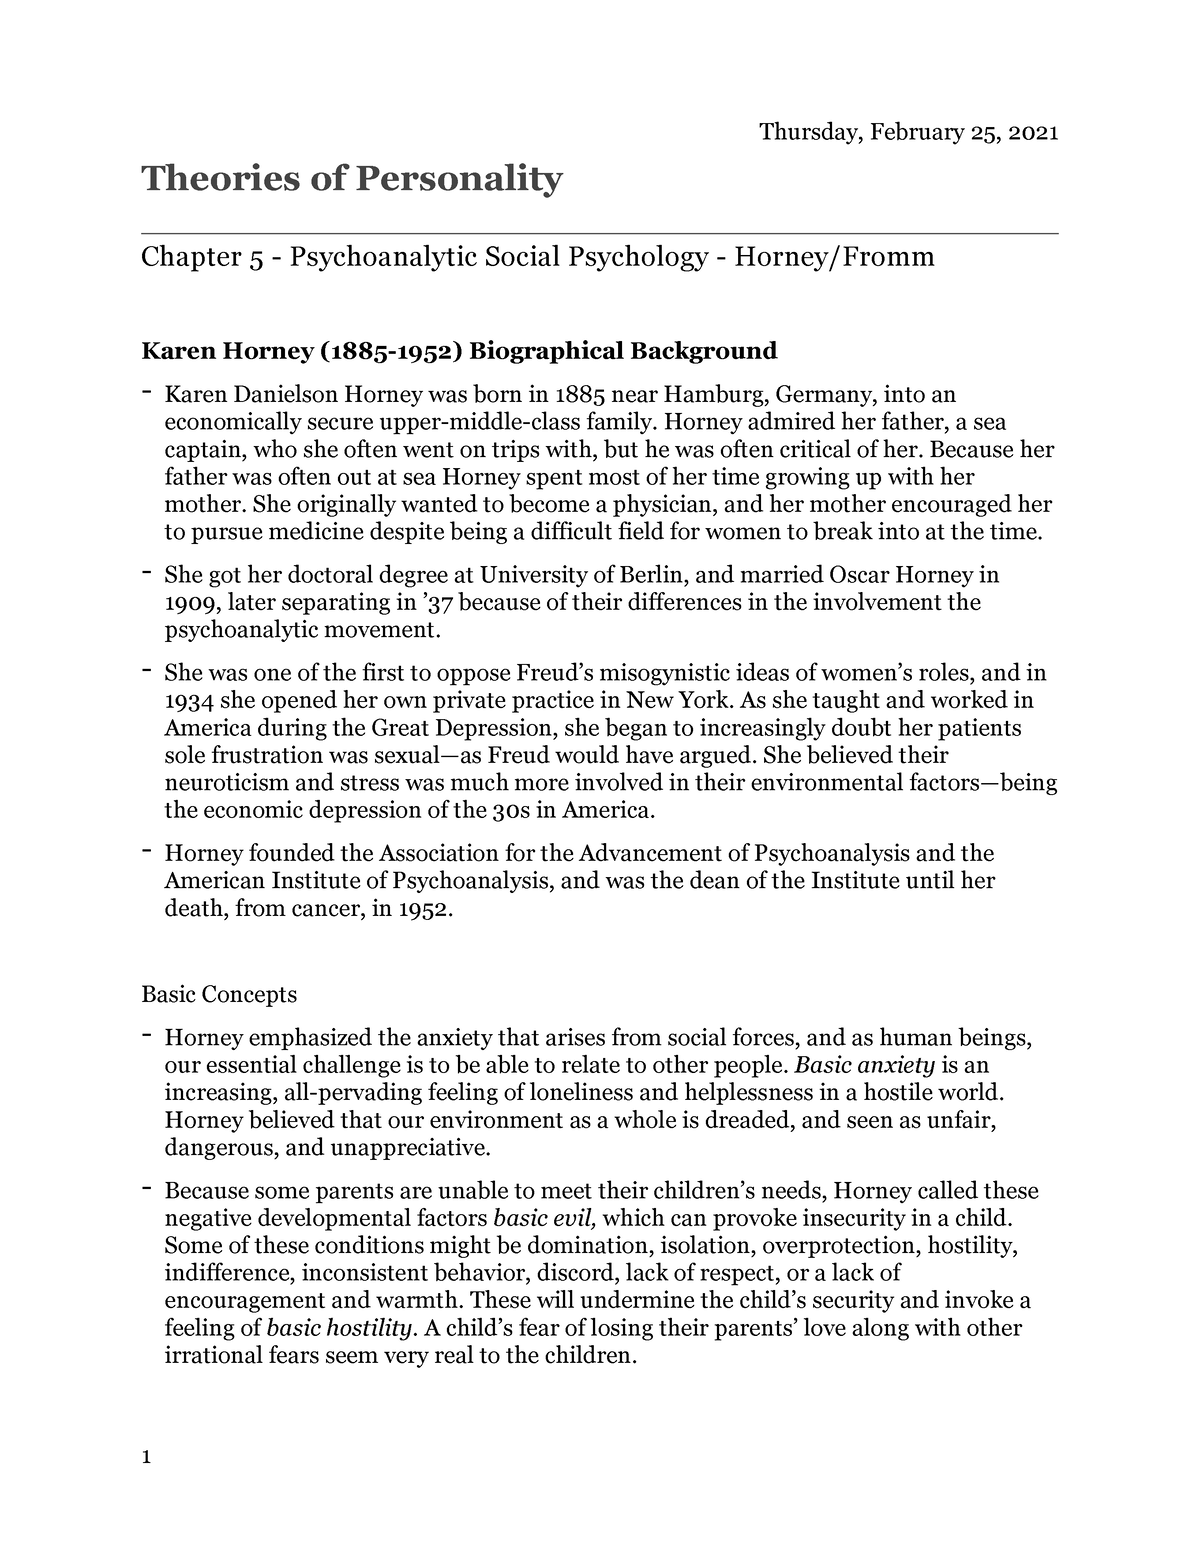 Theories of Personality Chapter 5 Notes - Horney, Fromm - Theories of ...